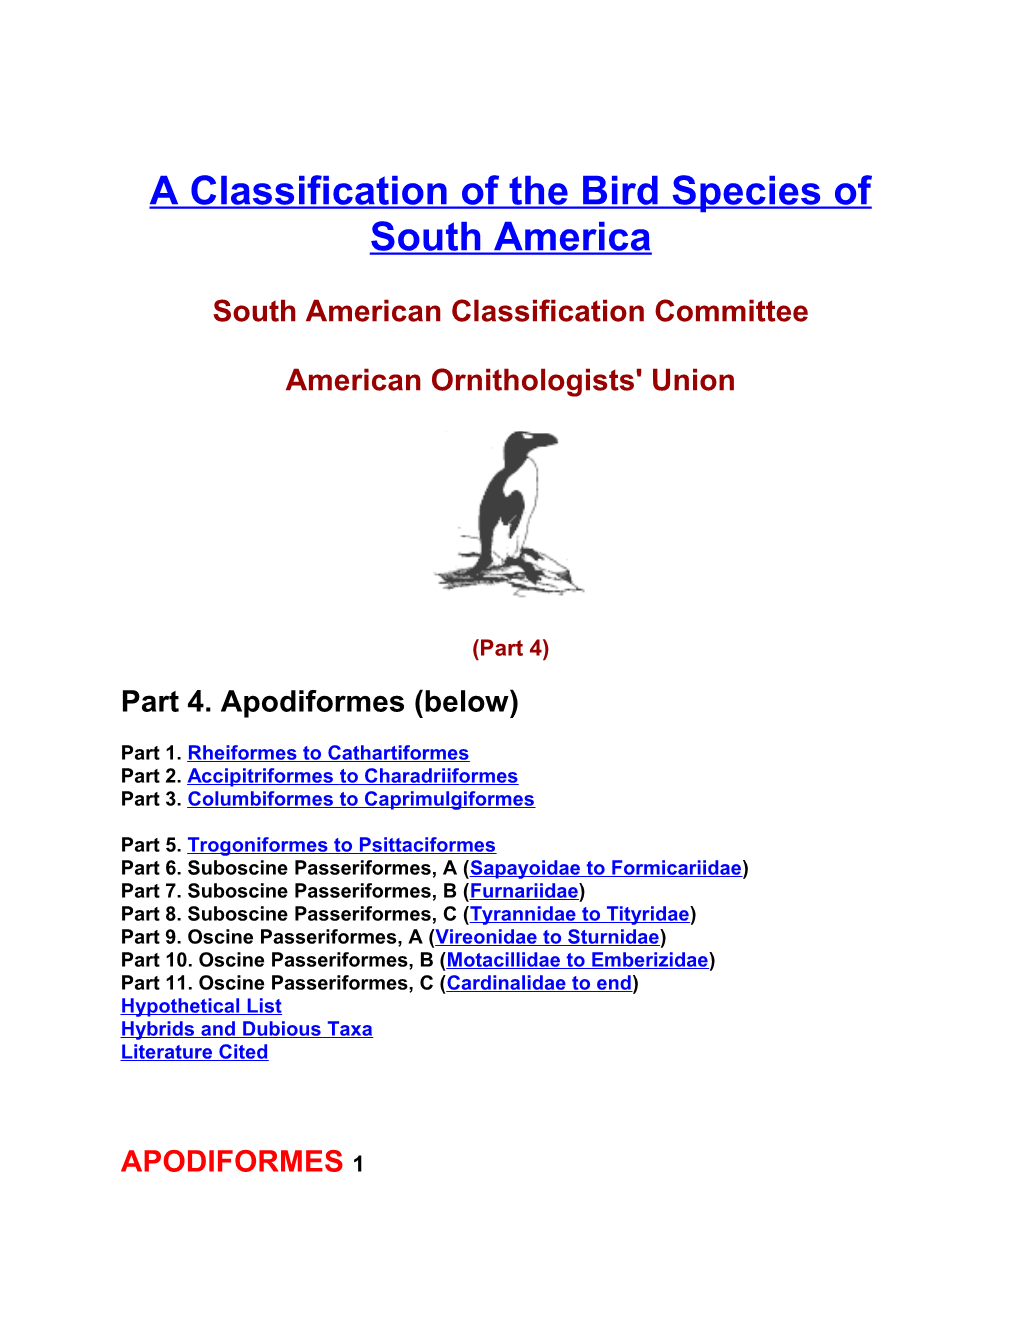 A Classification of the Bird Species of South America. Part 4